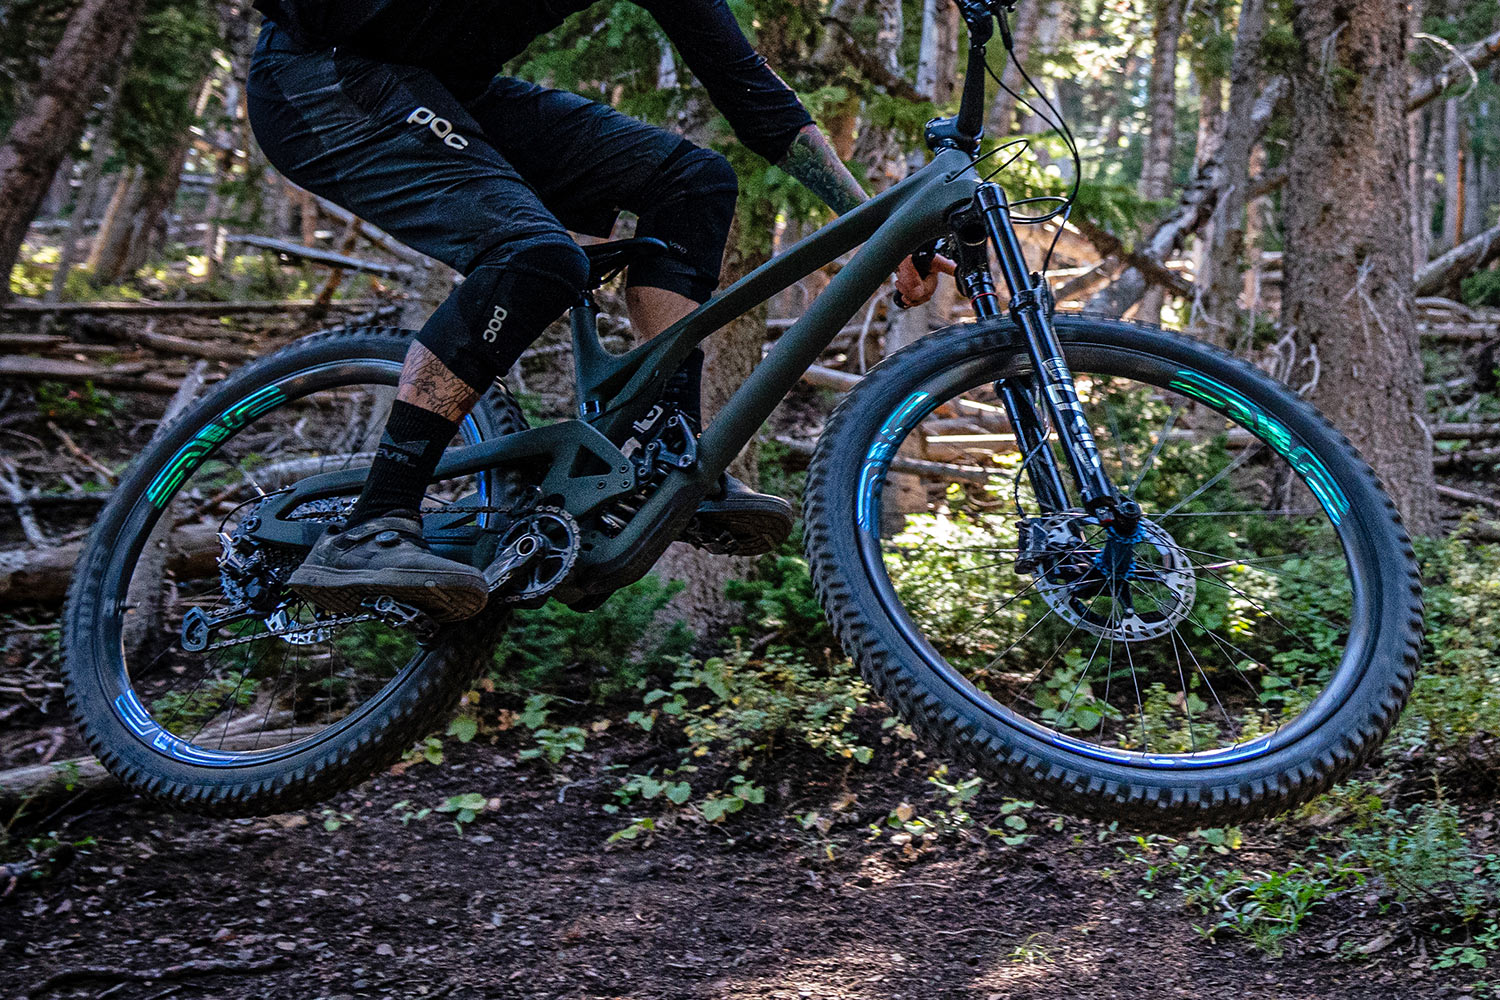 2022 Evil Offering LS 141mm carbon trail bike lightly salted updates, photo by Brian Gerow